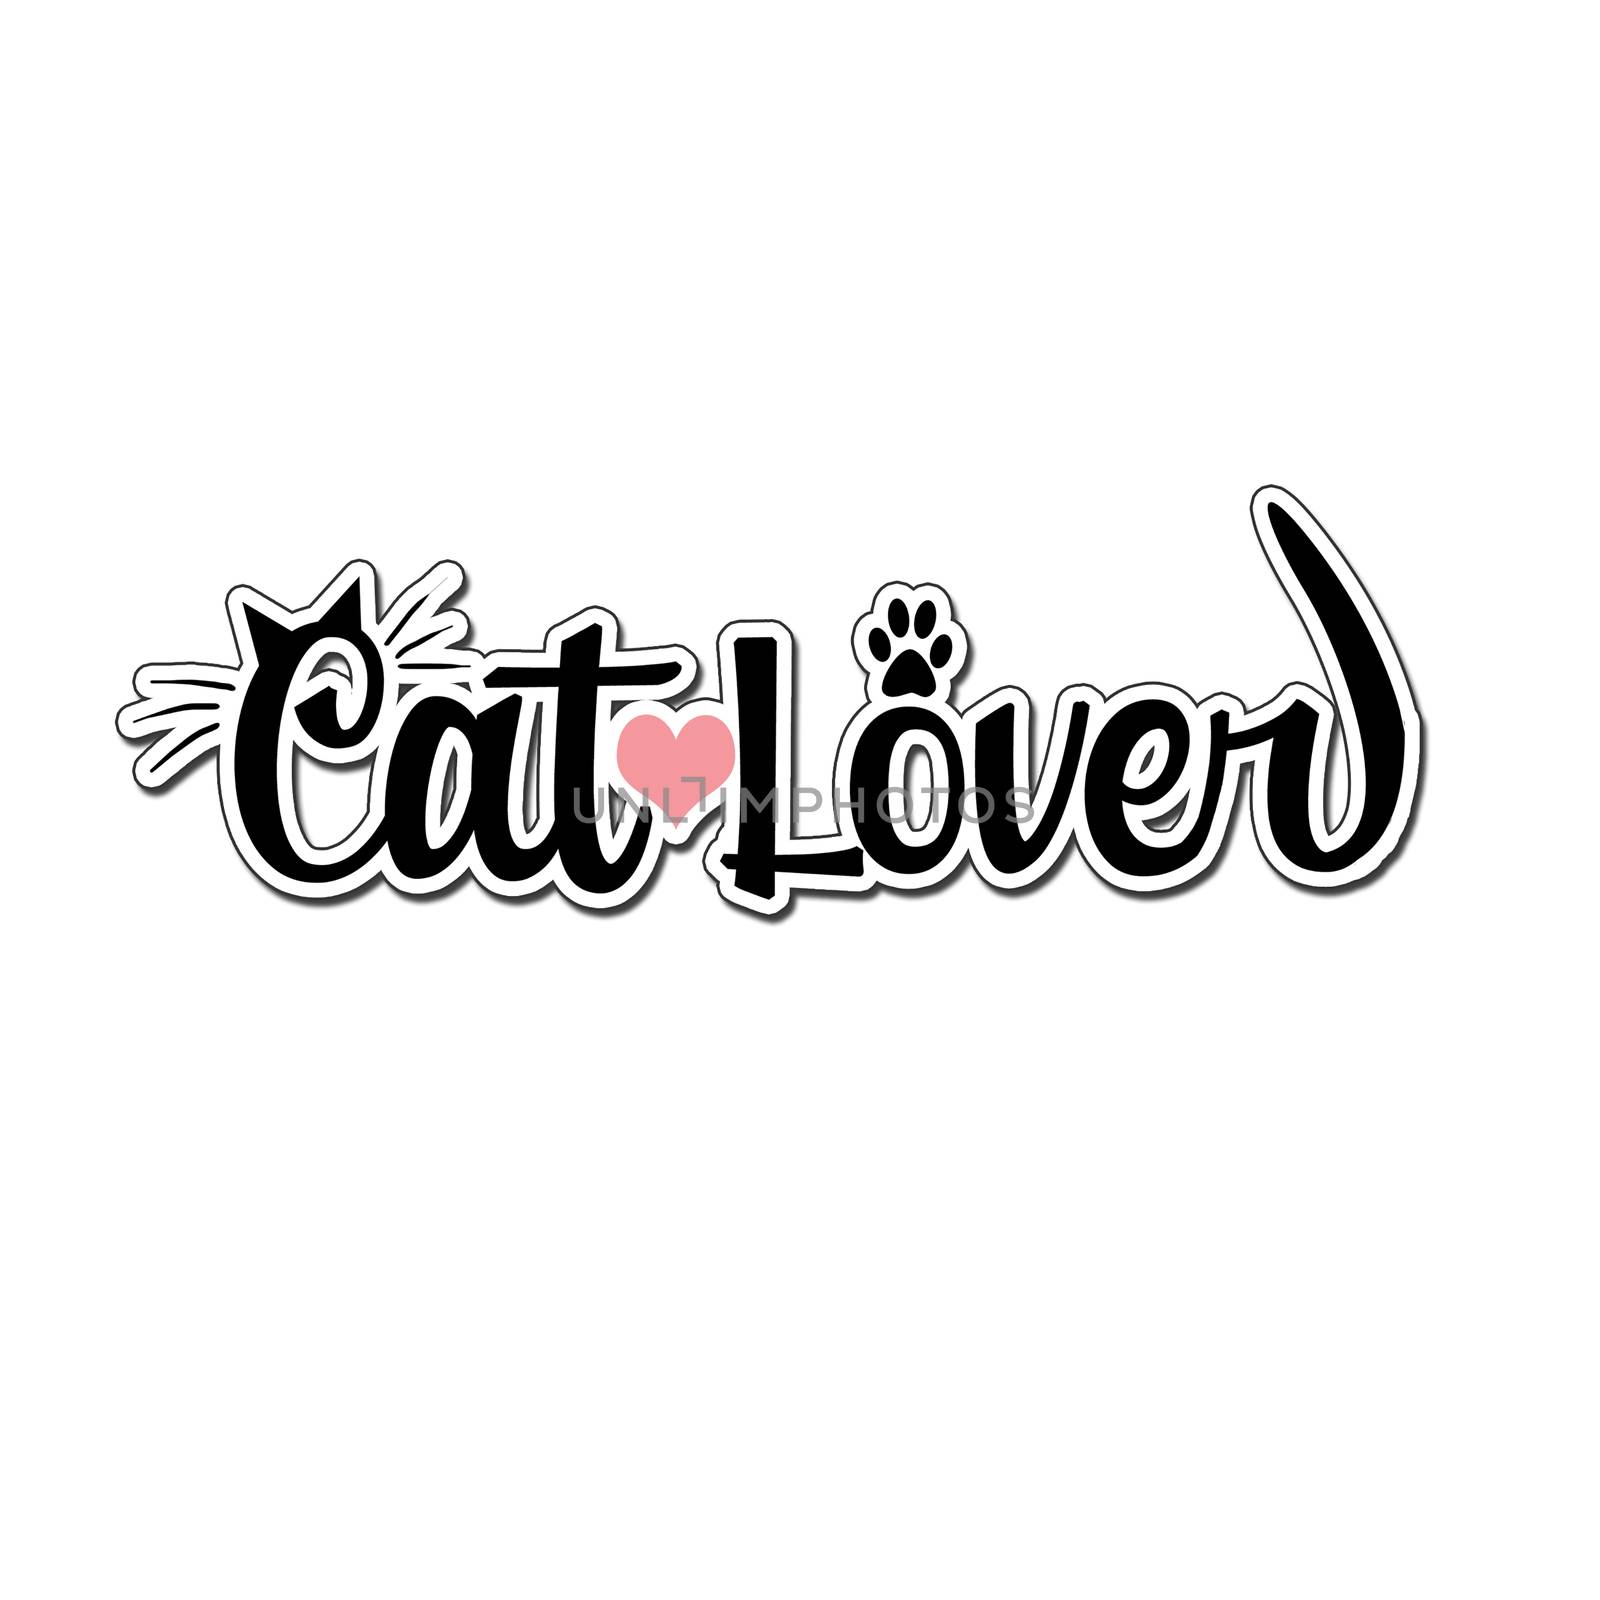 "cat Lover" logo - text background by GGillustrations